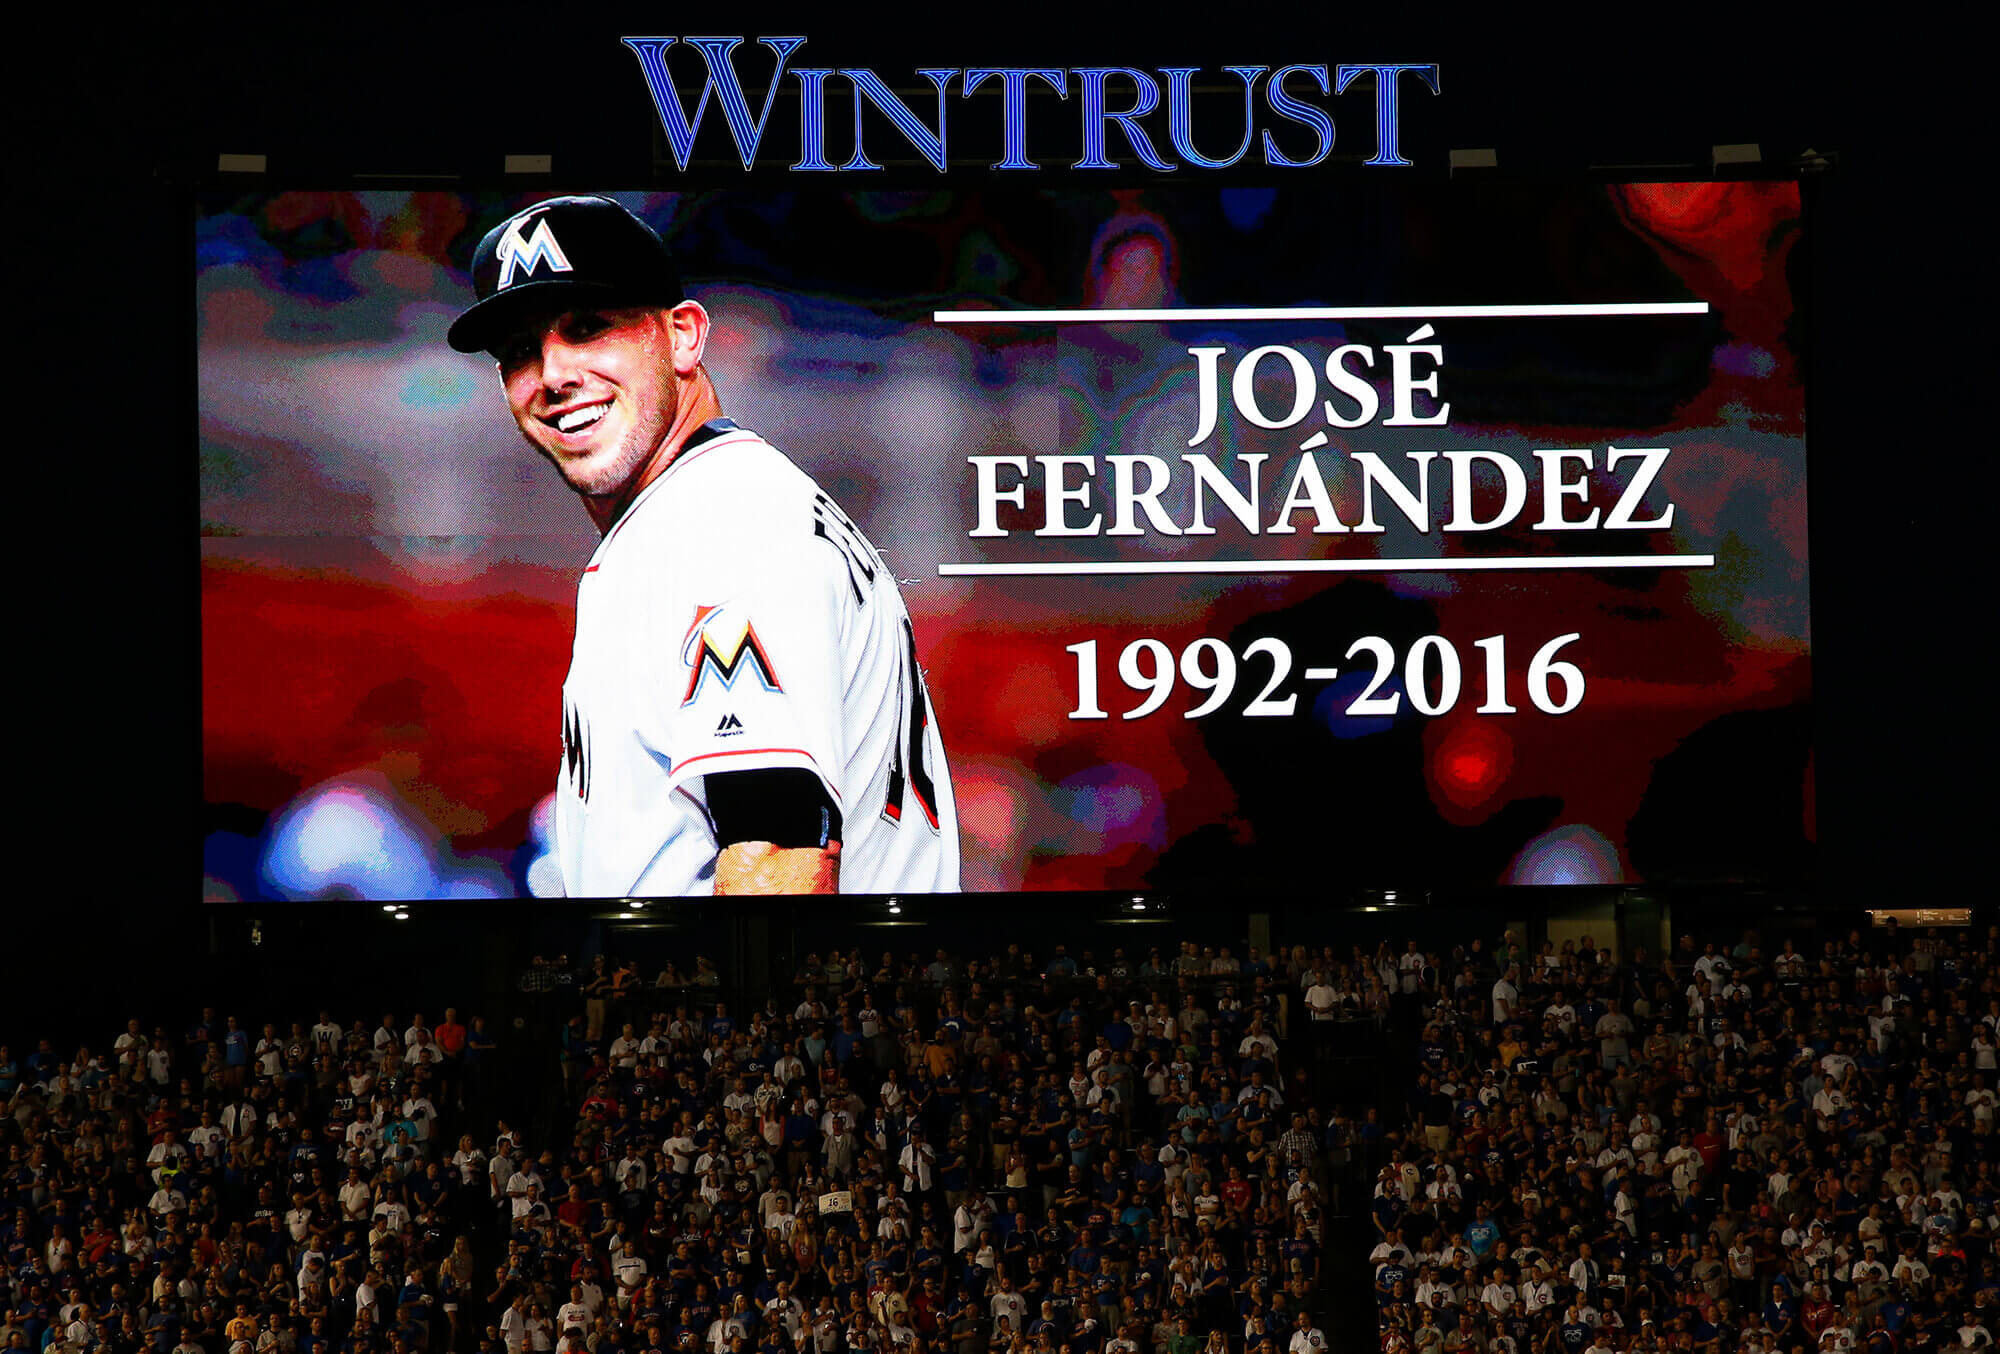 Image of Jose Fernandez being remembered at a baseball game